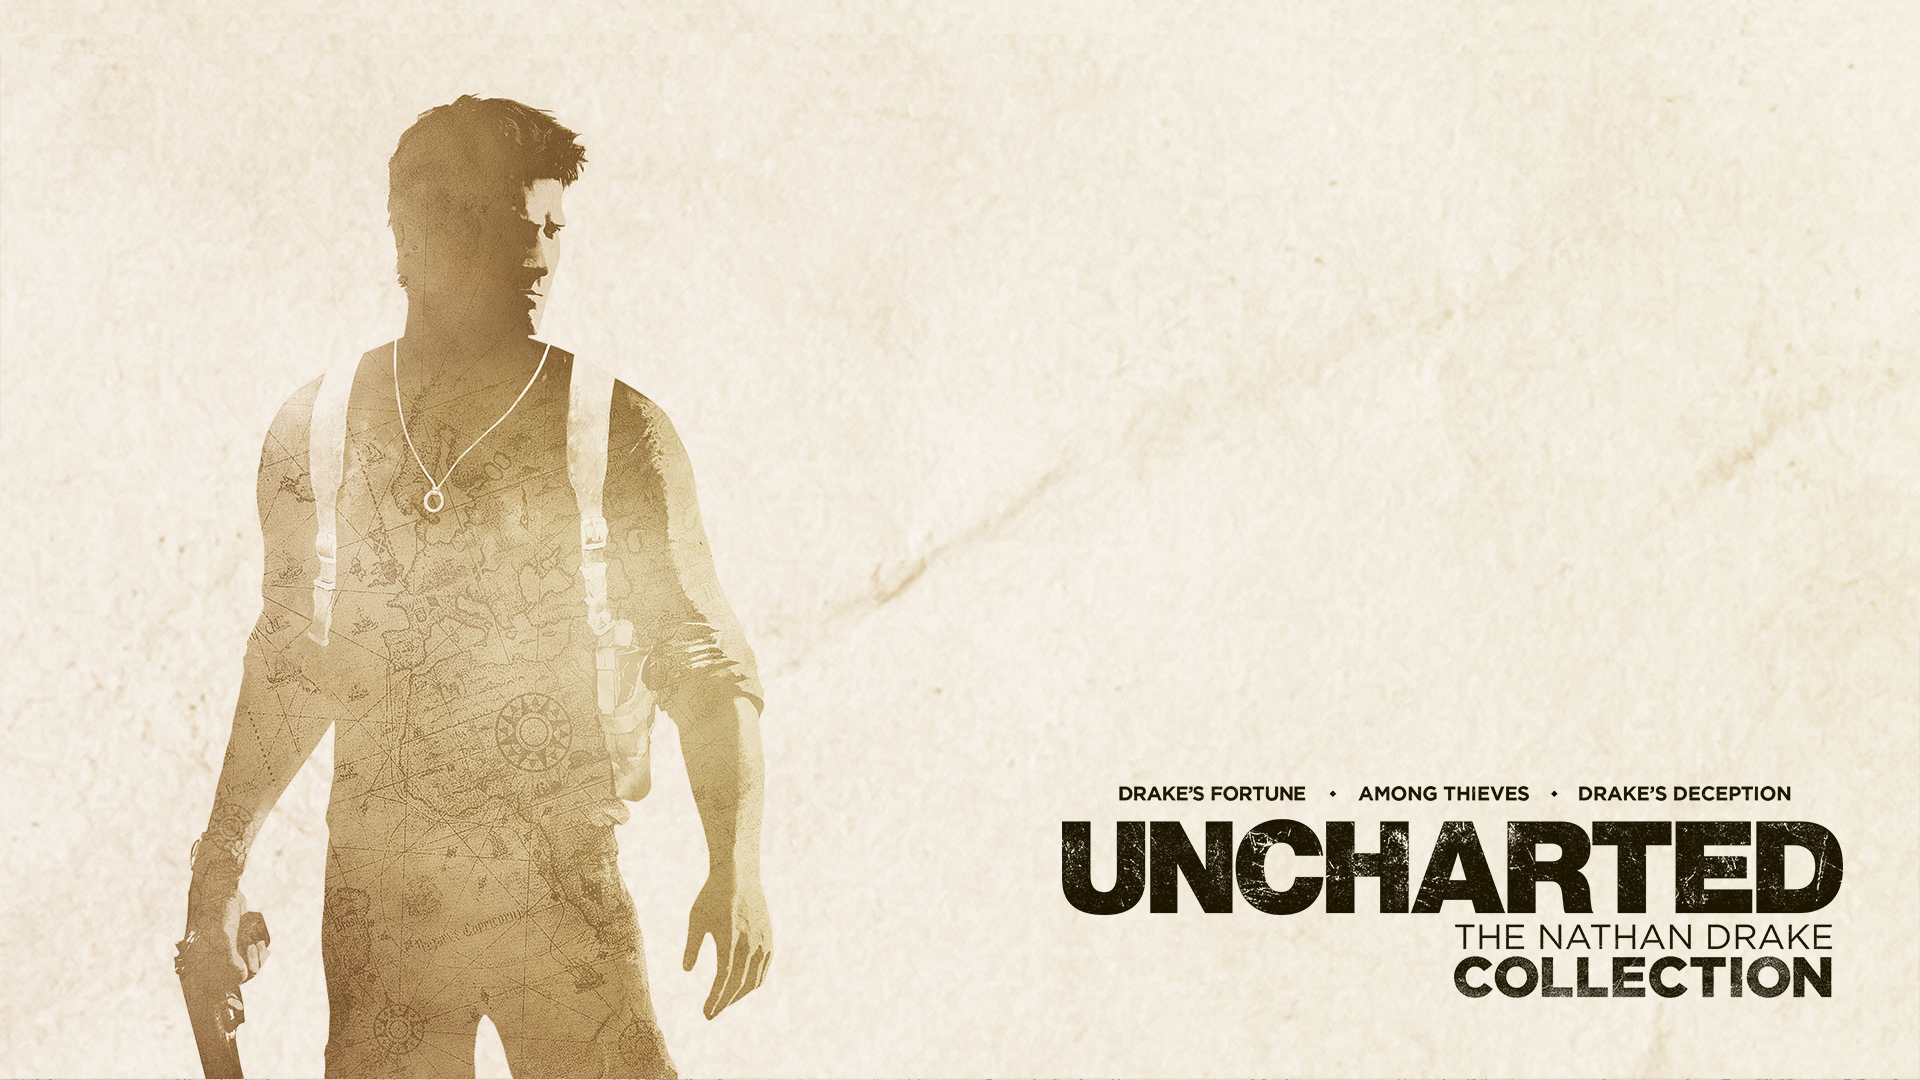 uncharted--the-nathan-drake-collection-Uncharted.jpg